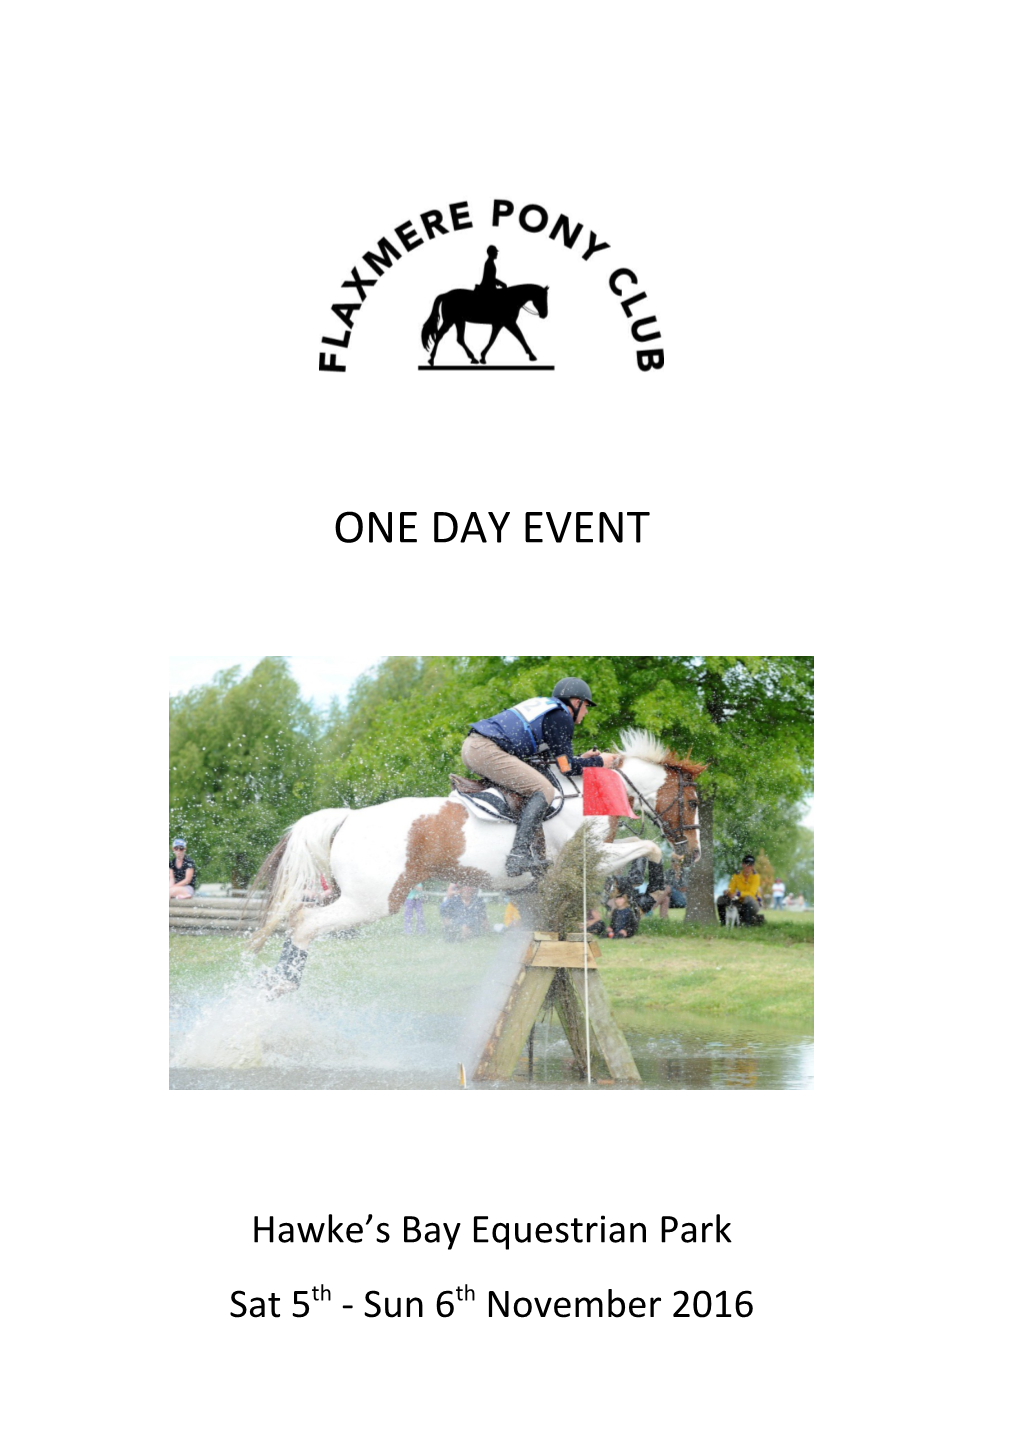 Flaxmere Pony Club Wish to Thank Our Generous Sponsors for Their Support